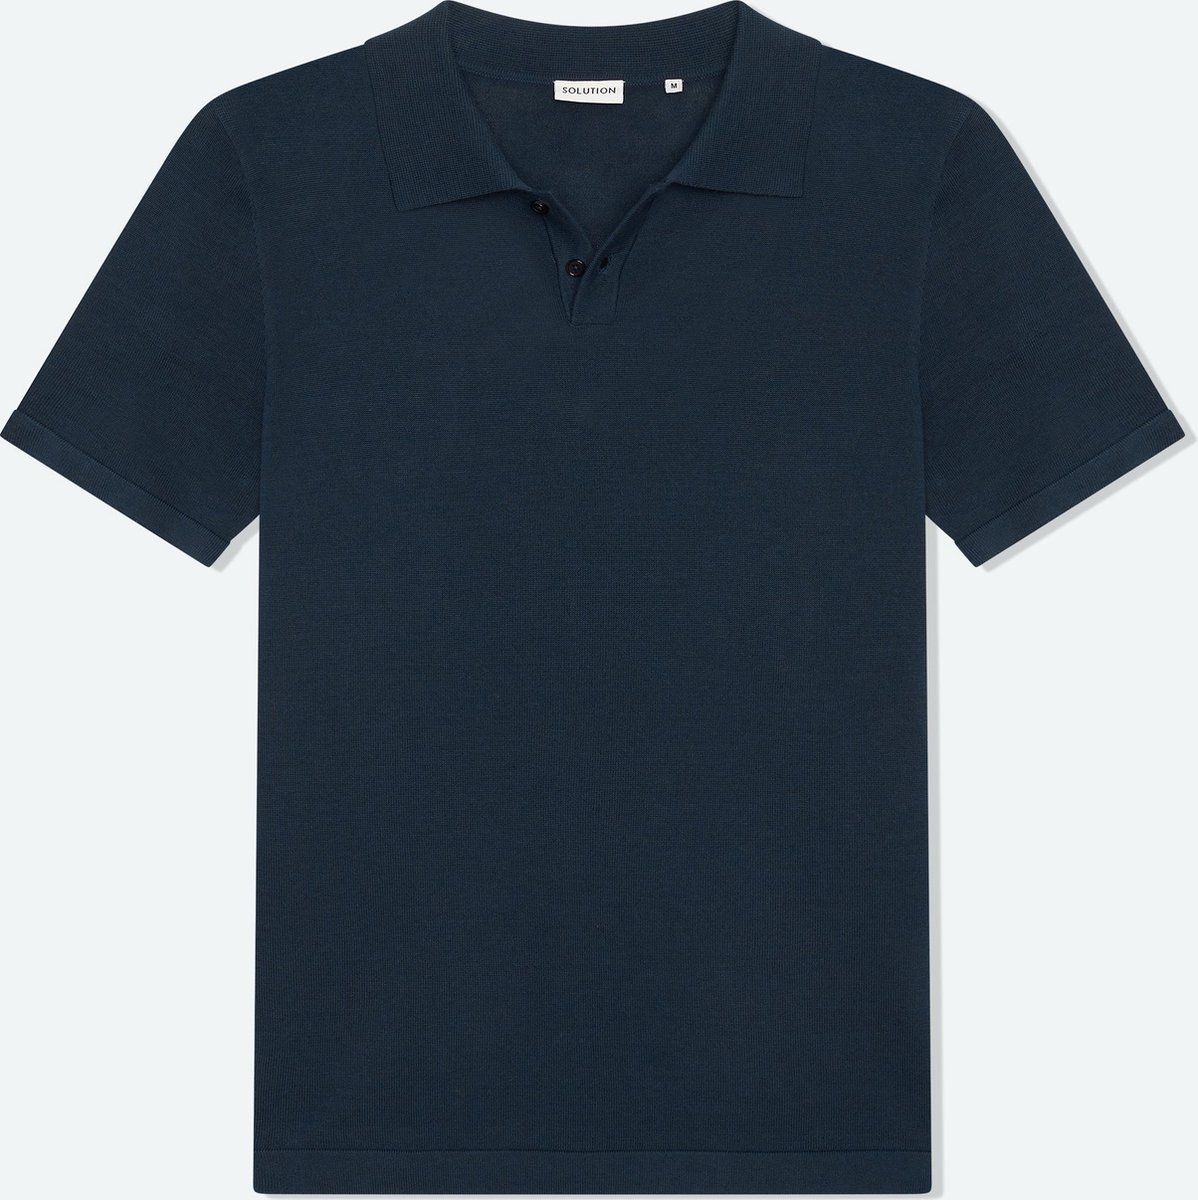 Solution Clothing Purdy - Casual Poloshirt - Regular Fit - Knoopsluiting - Volwassenen - Heren - Mannen - Navy - S - S - Solution Clothing